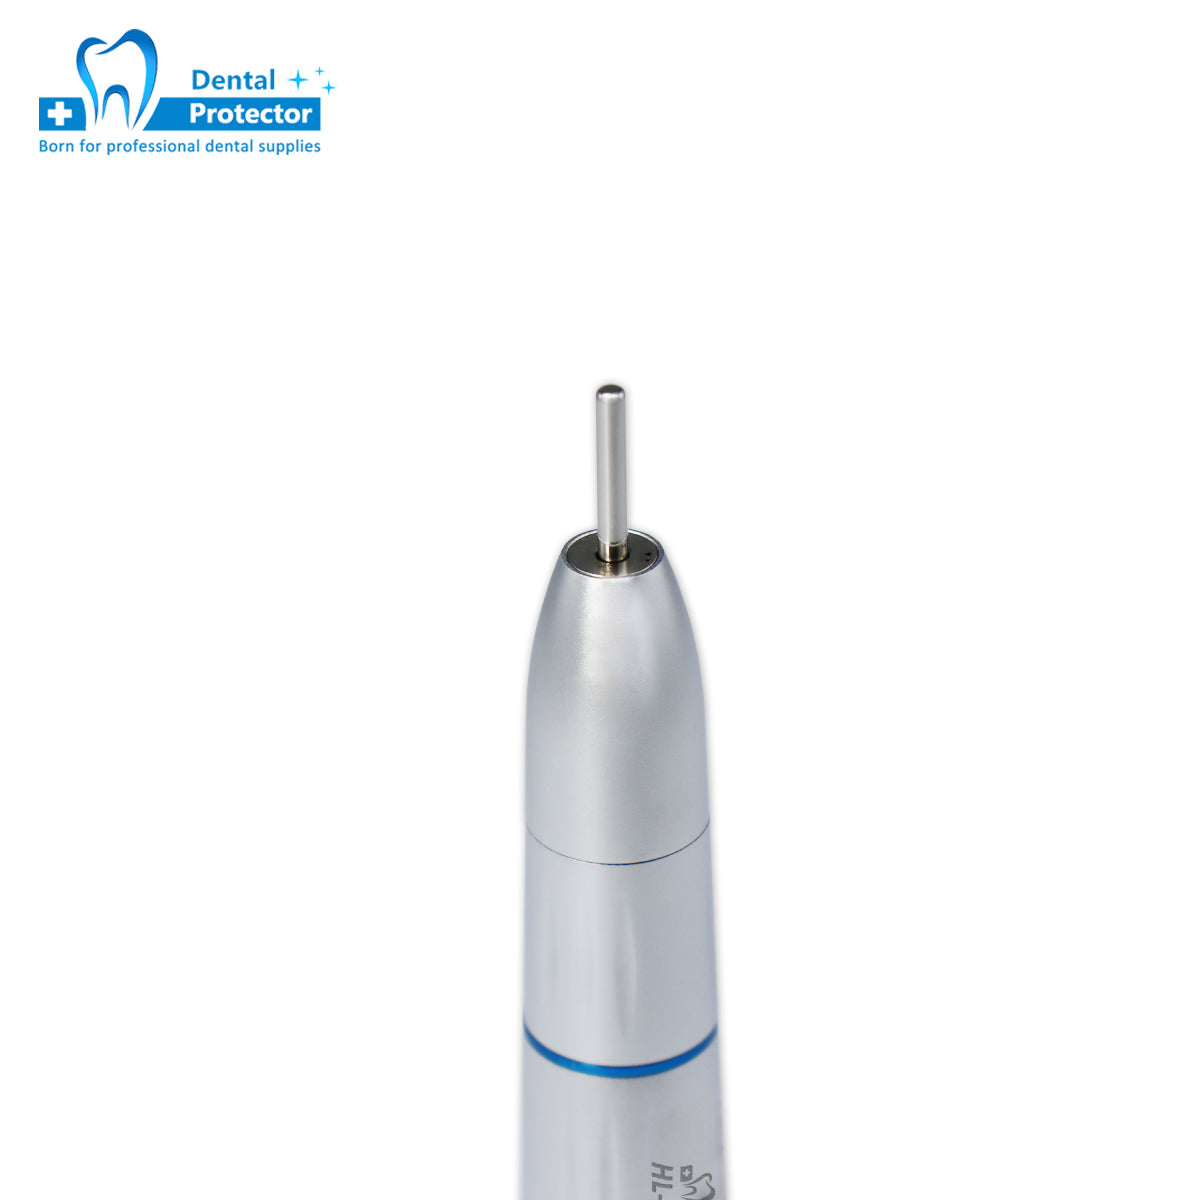 HL-BS Low Speed Straight Head Dental Handpiece With Cooling and Cleaning Functions